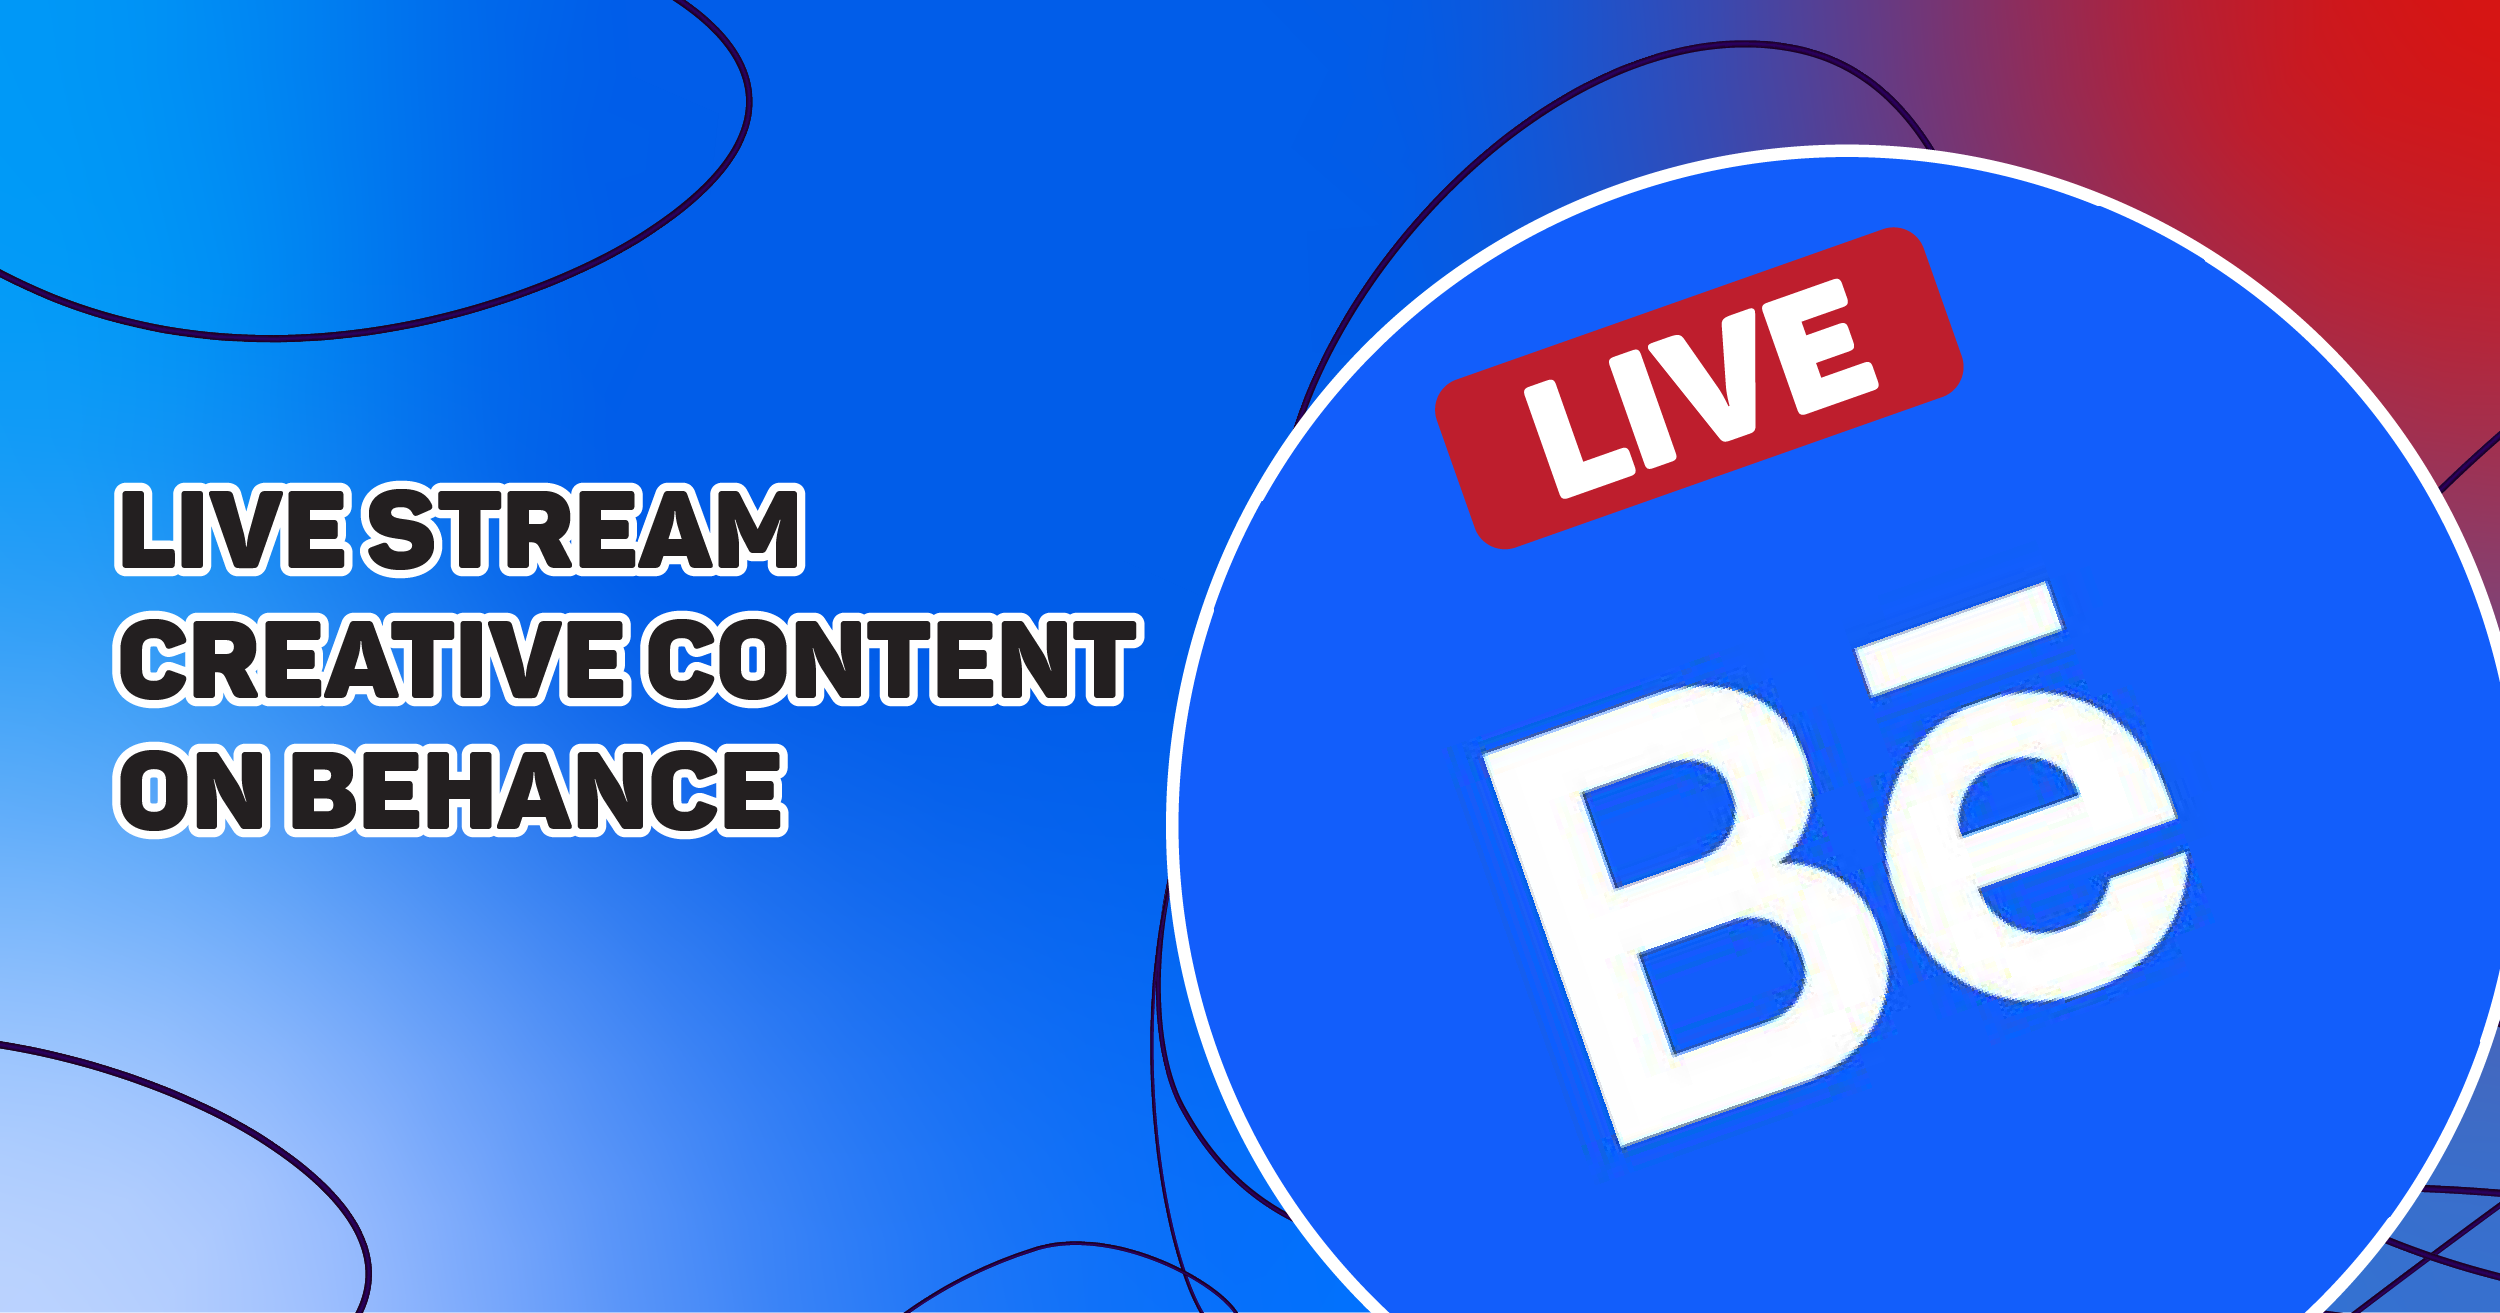 Live Streaming Your Creative Content on Behance